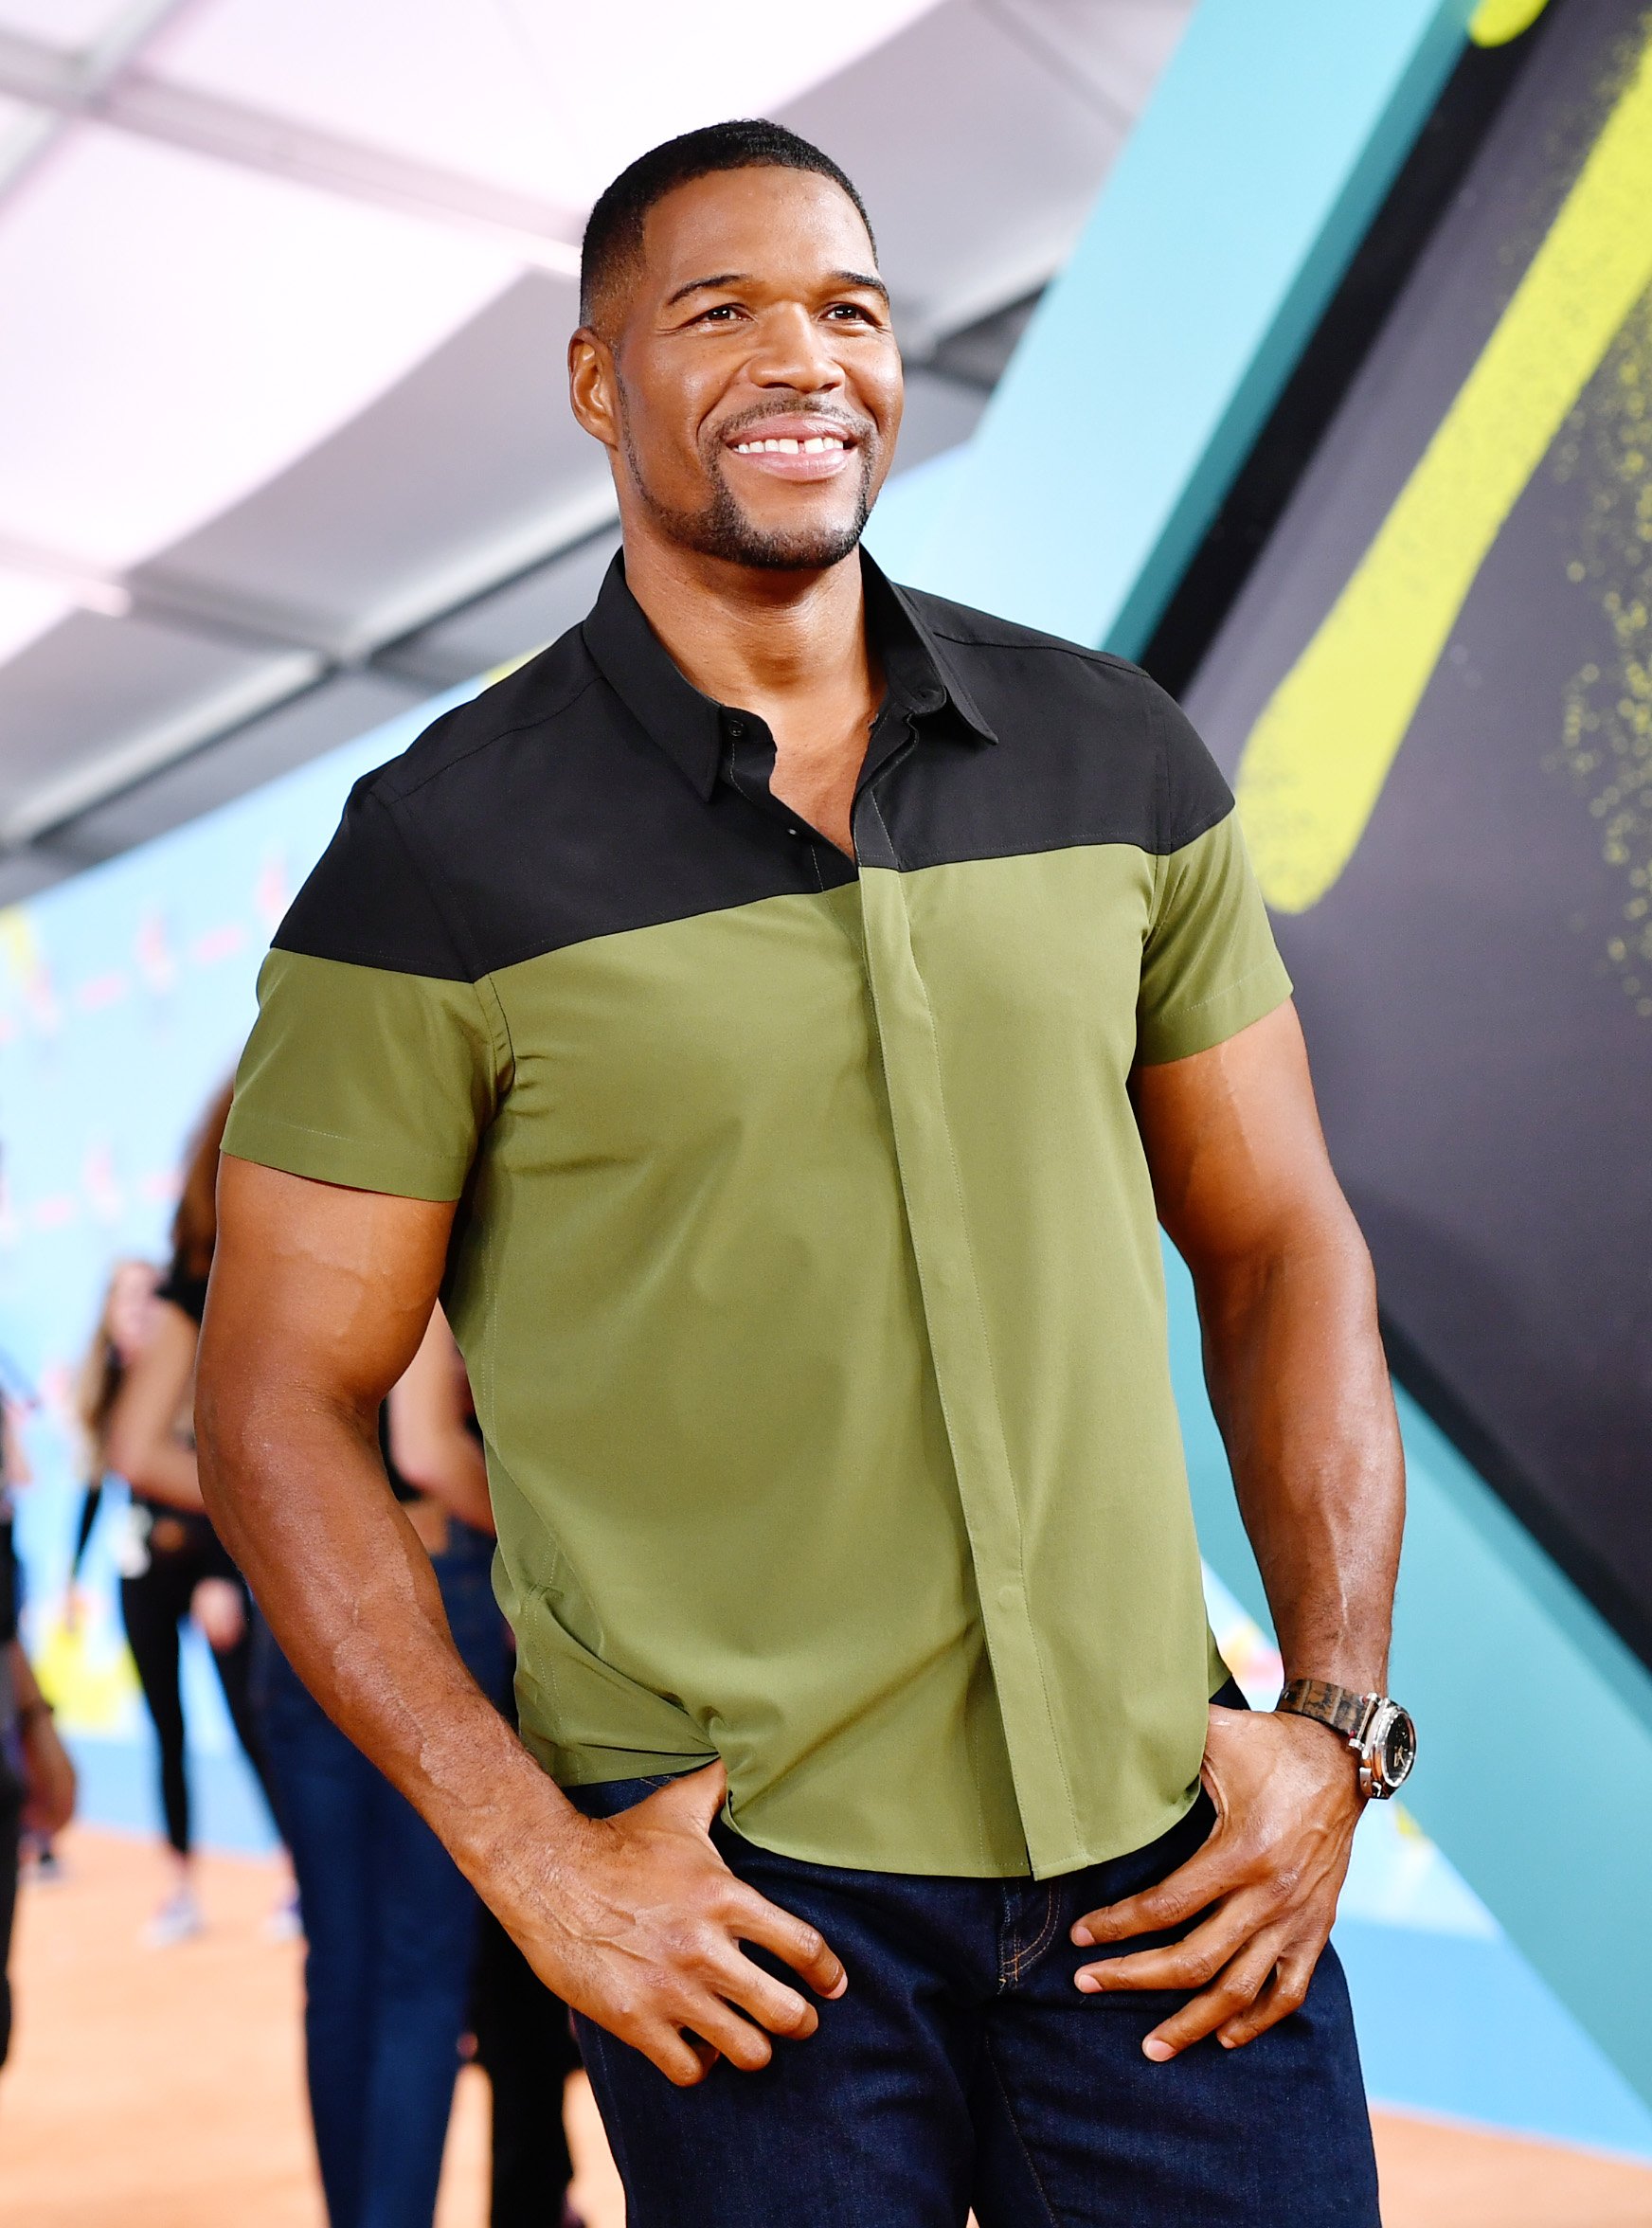 Michael Strahan attends Nickelodeon Kids' Choice Sports 2019 at Barker Hangar on July 11, 2019 | Photo: GettyImages